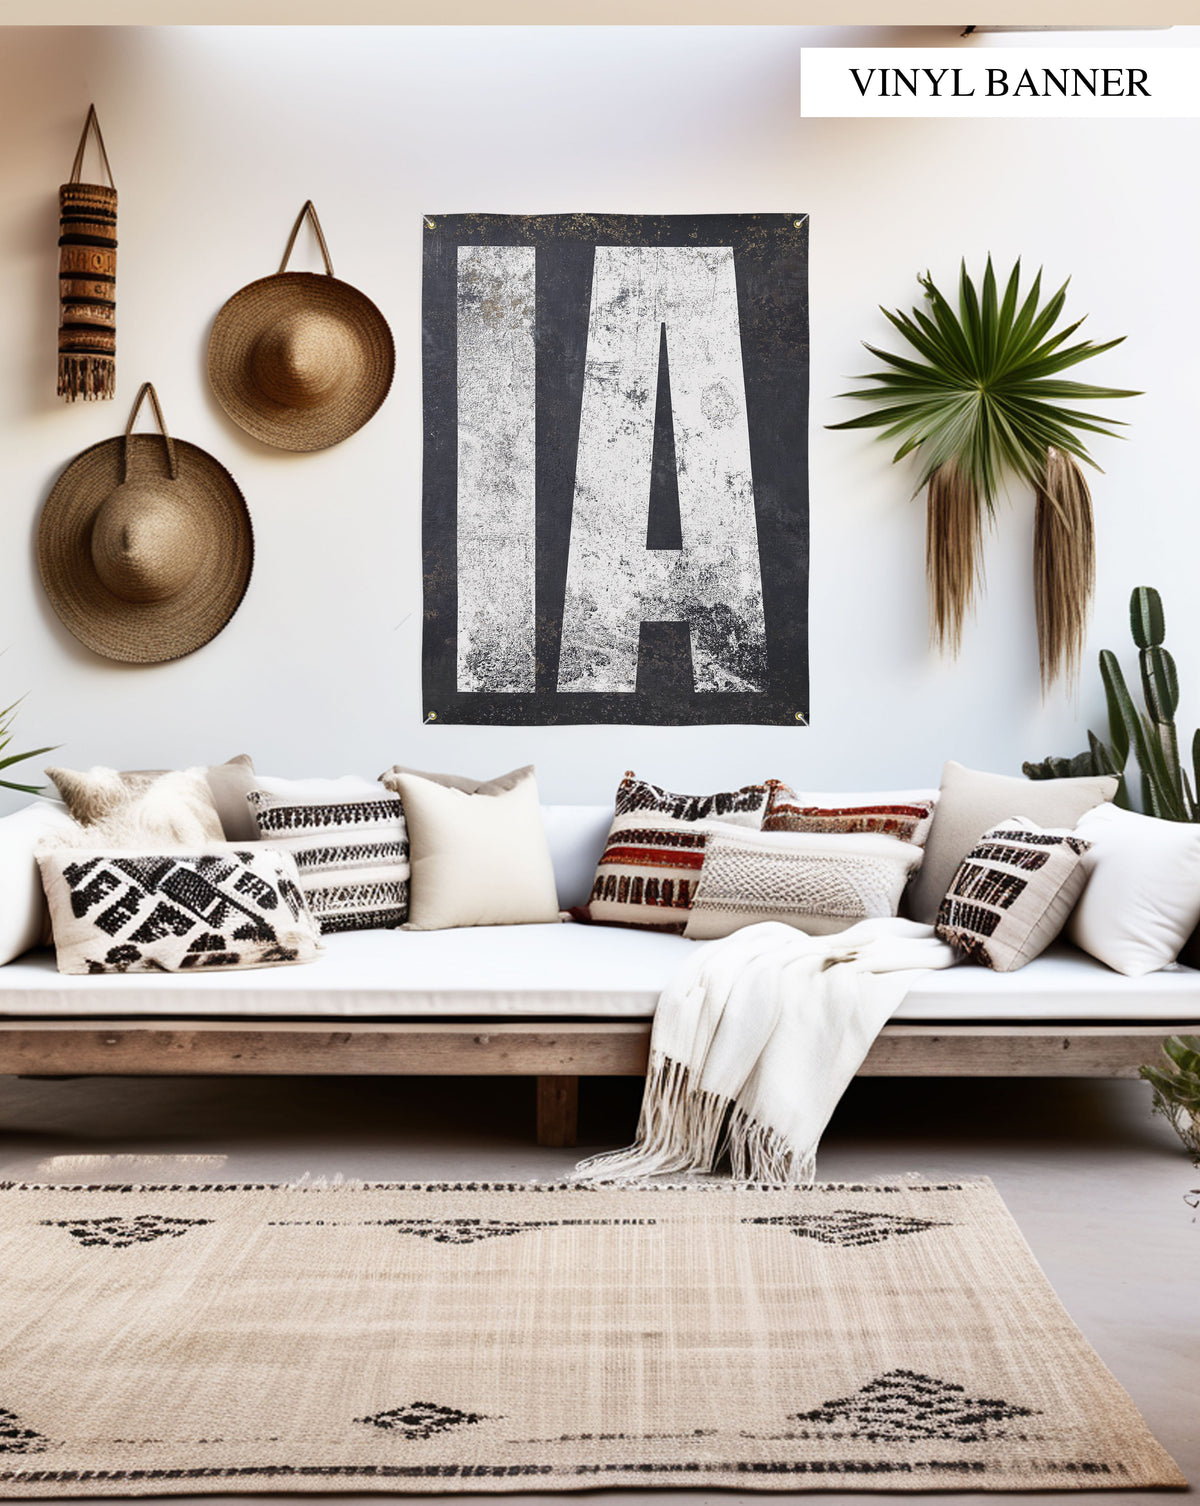 "Durable and versatile 'IA' vinyl banner that embodies Iowa's agricultural heritage and cultural richness. Designed for both indoor and outdoor use, it's a simple yet stylish way to pay homage to the Hawkeye State.